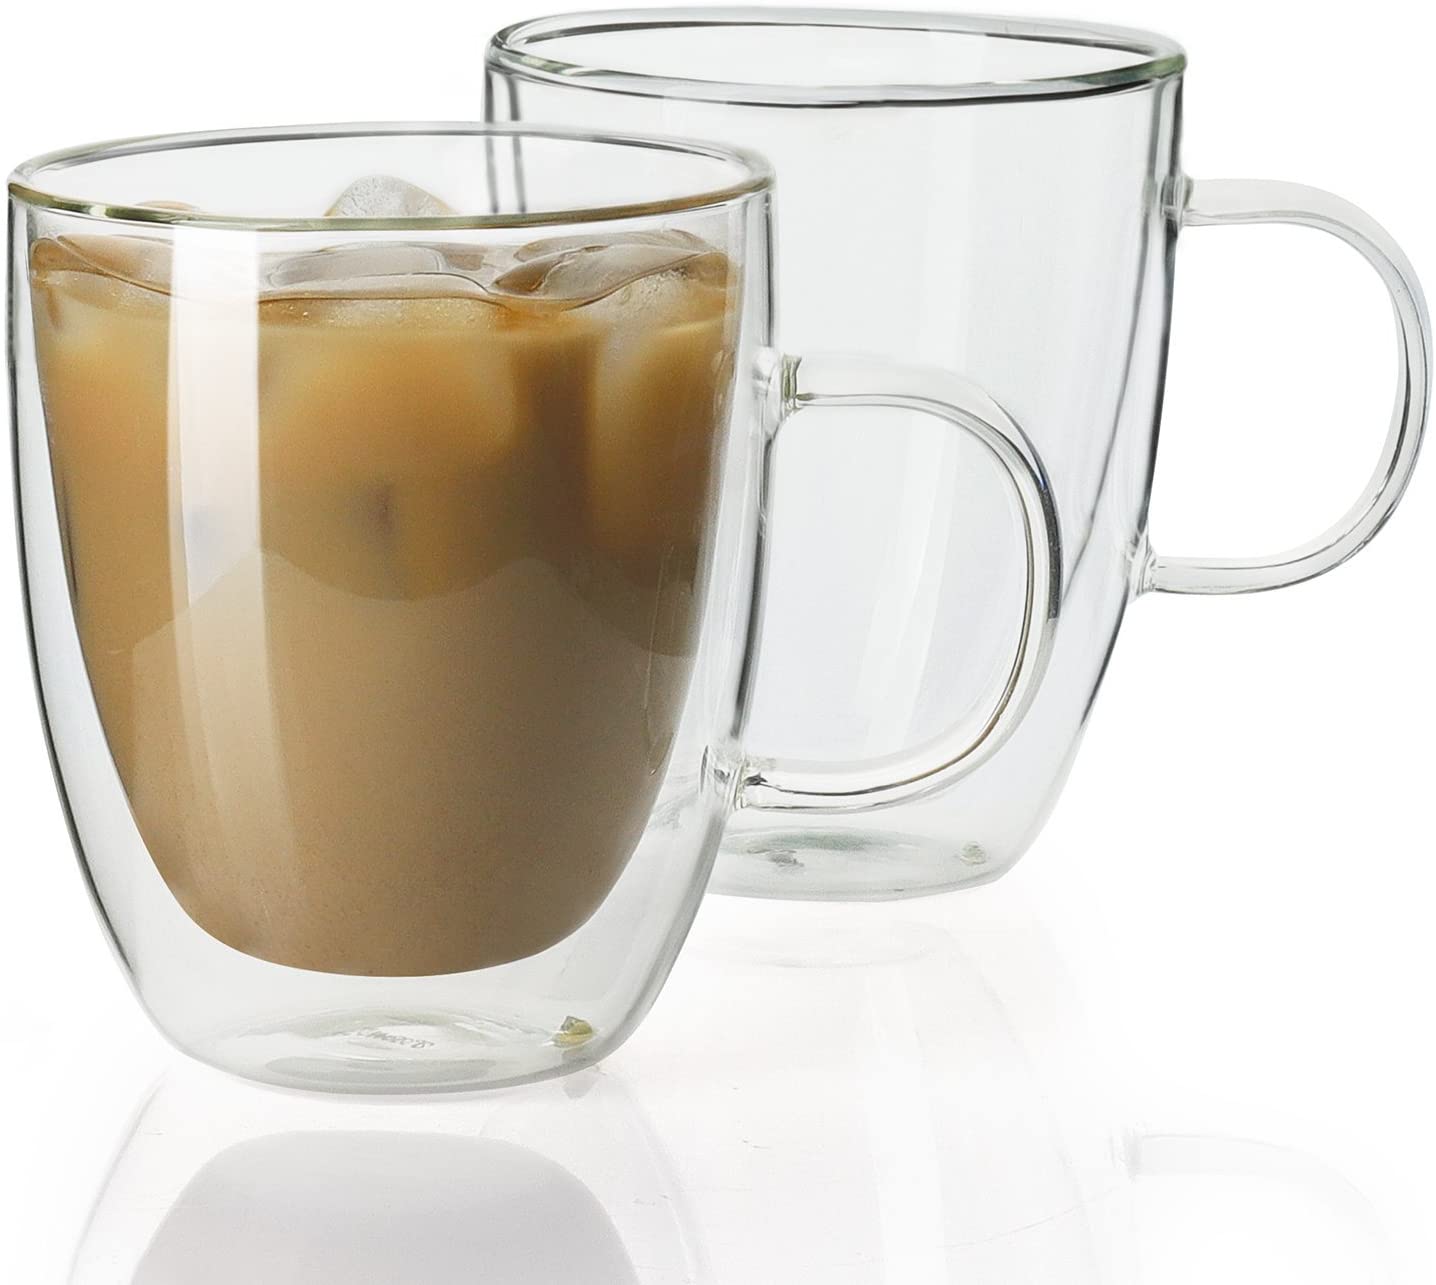 Sweese Double-Walled Glass Mugs with Handles